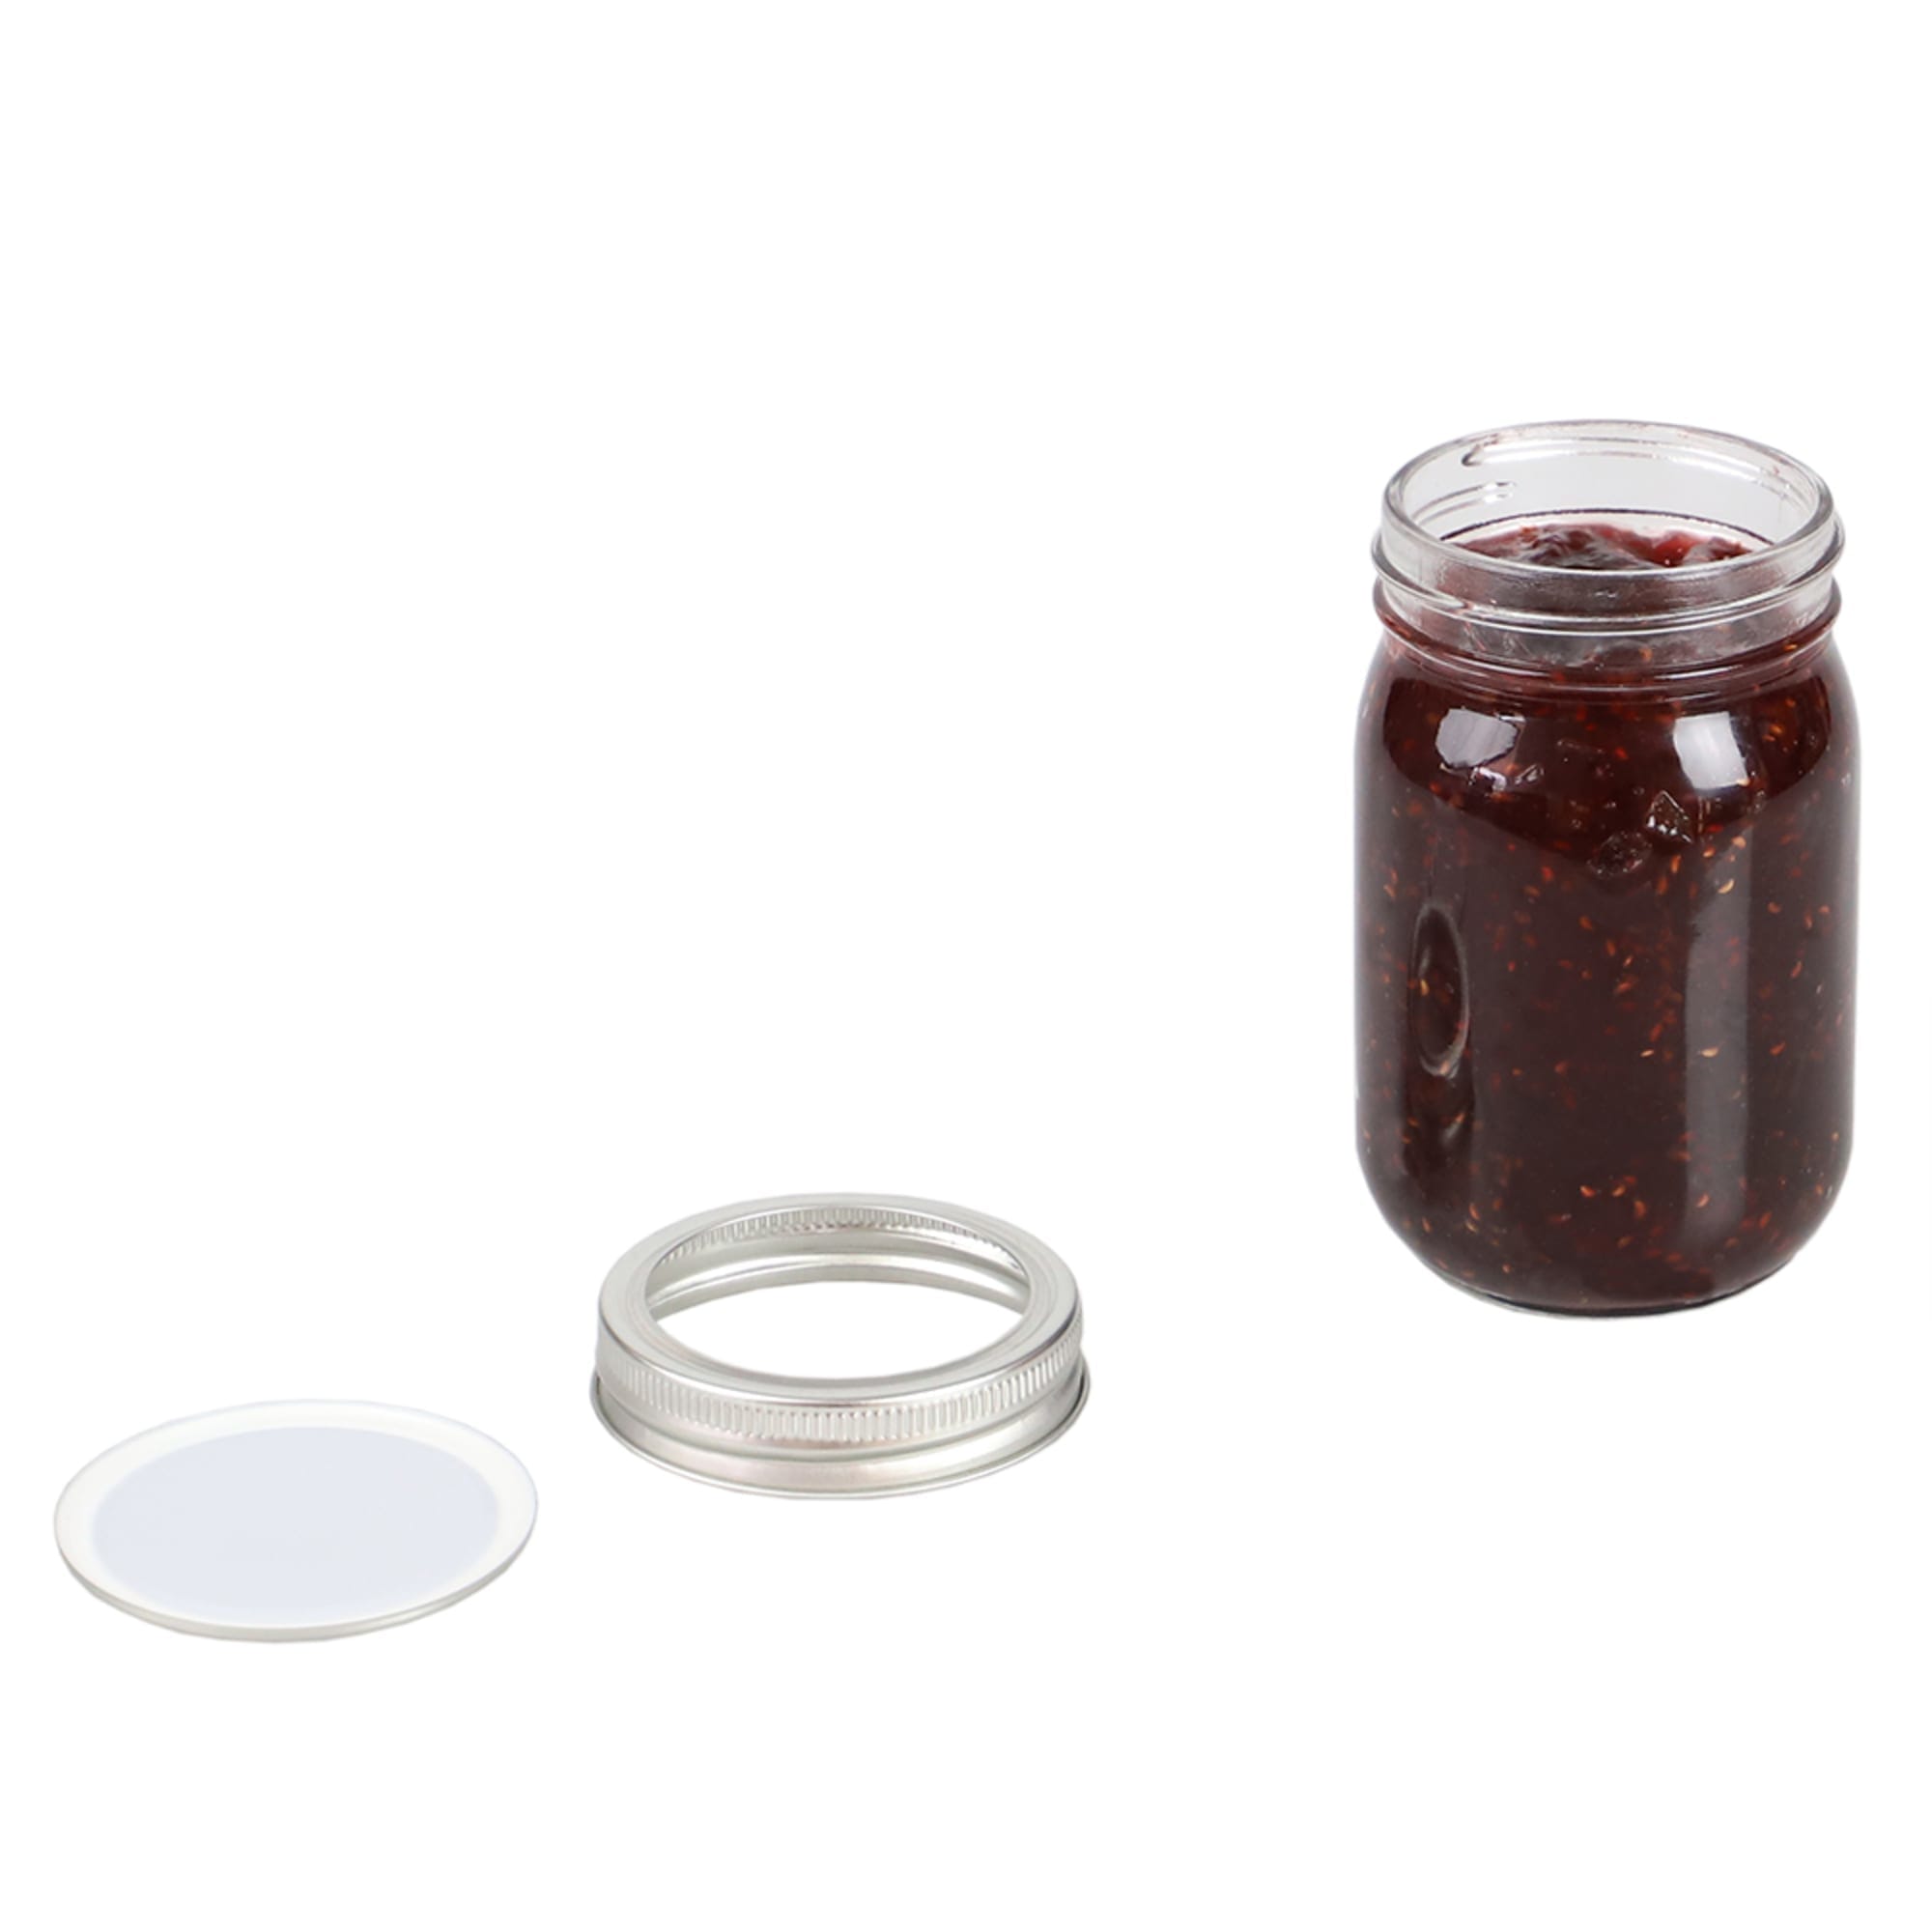 Home Basics 12 oz. Wide Mouth Clear Mason Canning Jar $1.25 EACH, CASE PACK OF 12